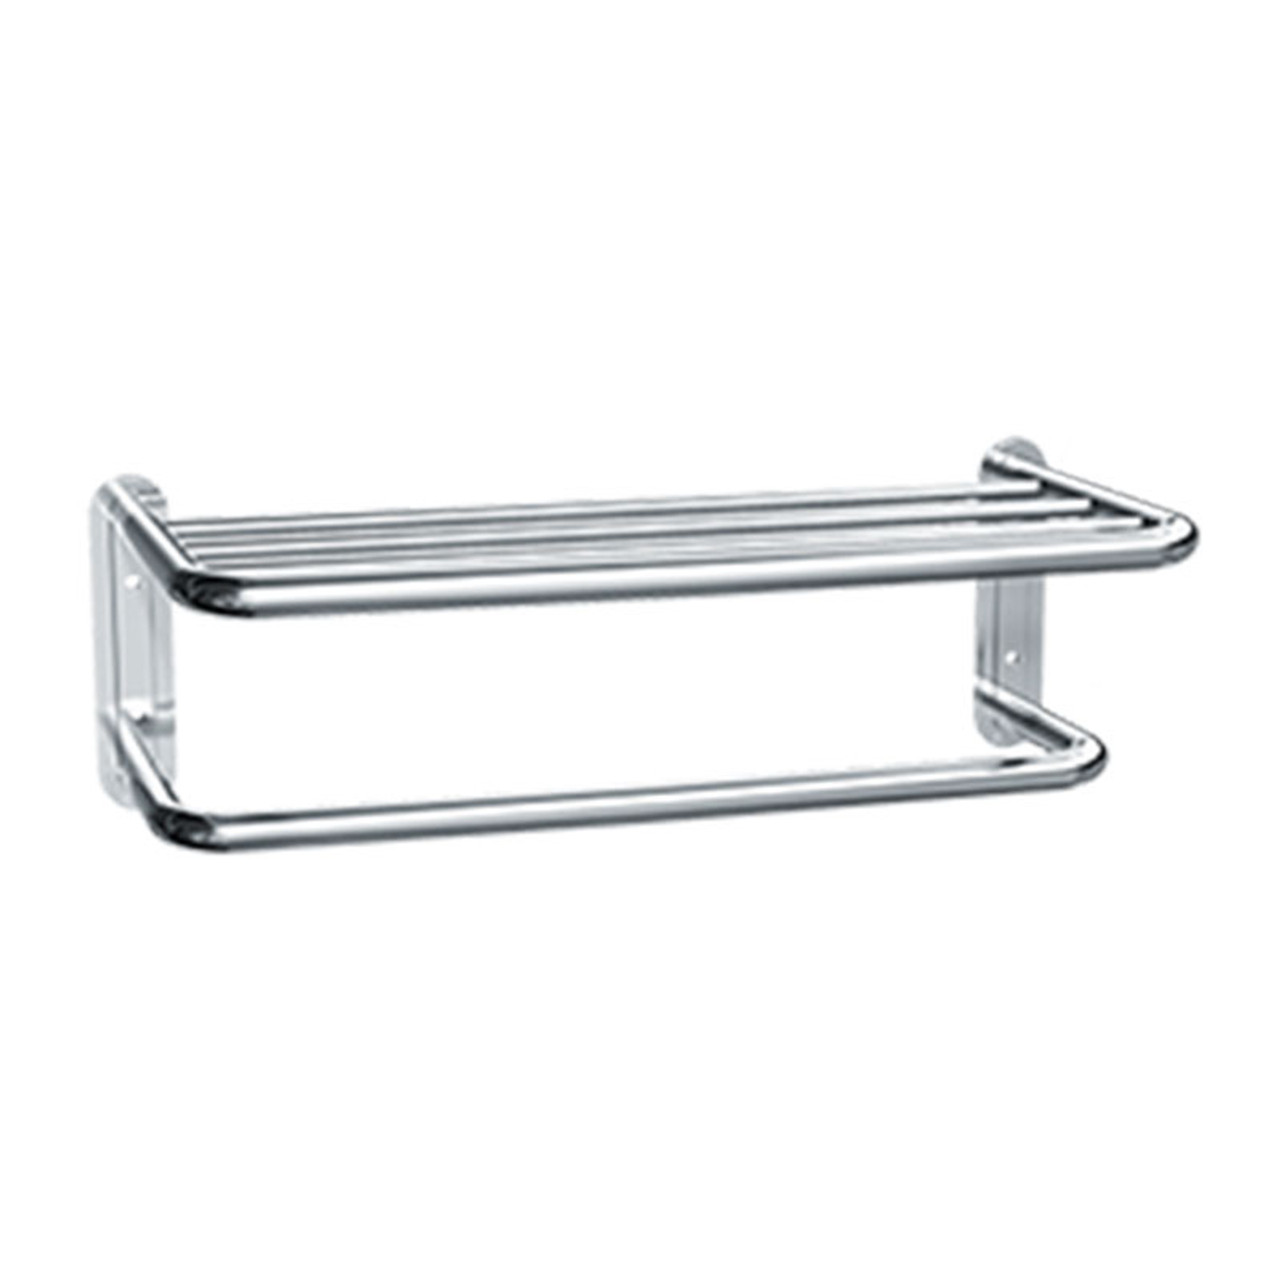 ASI Surface Mounted Stainless Steel Towel Shelf with Towel Bar 7311